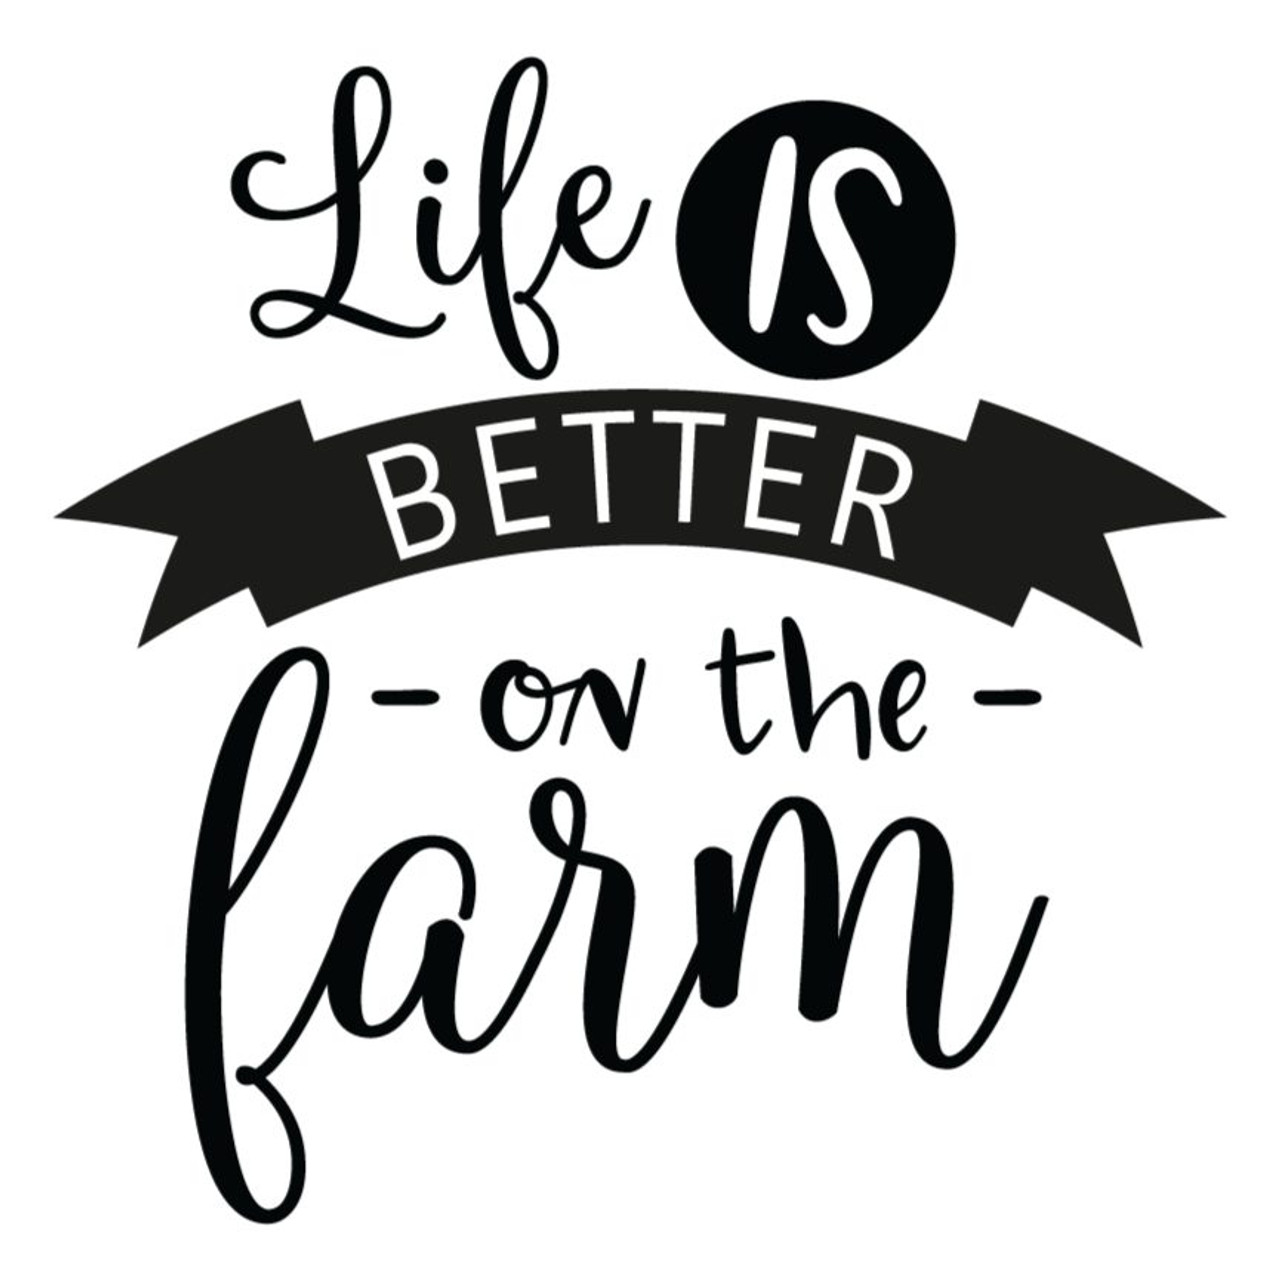 Life Is Better On The Farm Svg Svg Eps Png Dxf Cut Files For Cricut And Silhouette Cameo By Savanasdesign